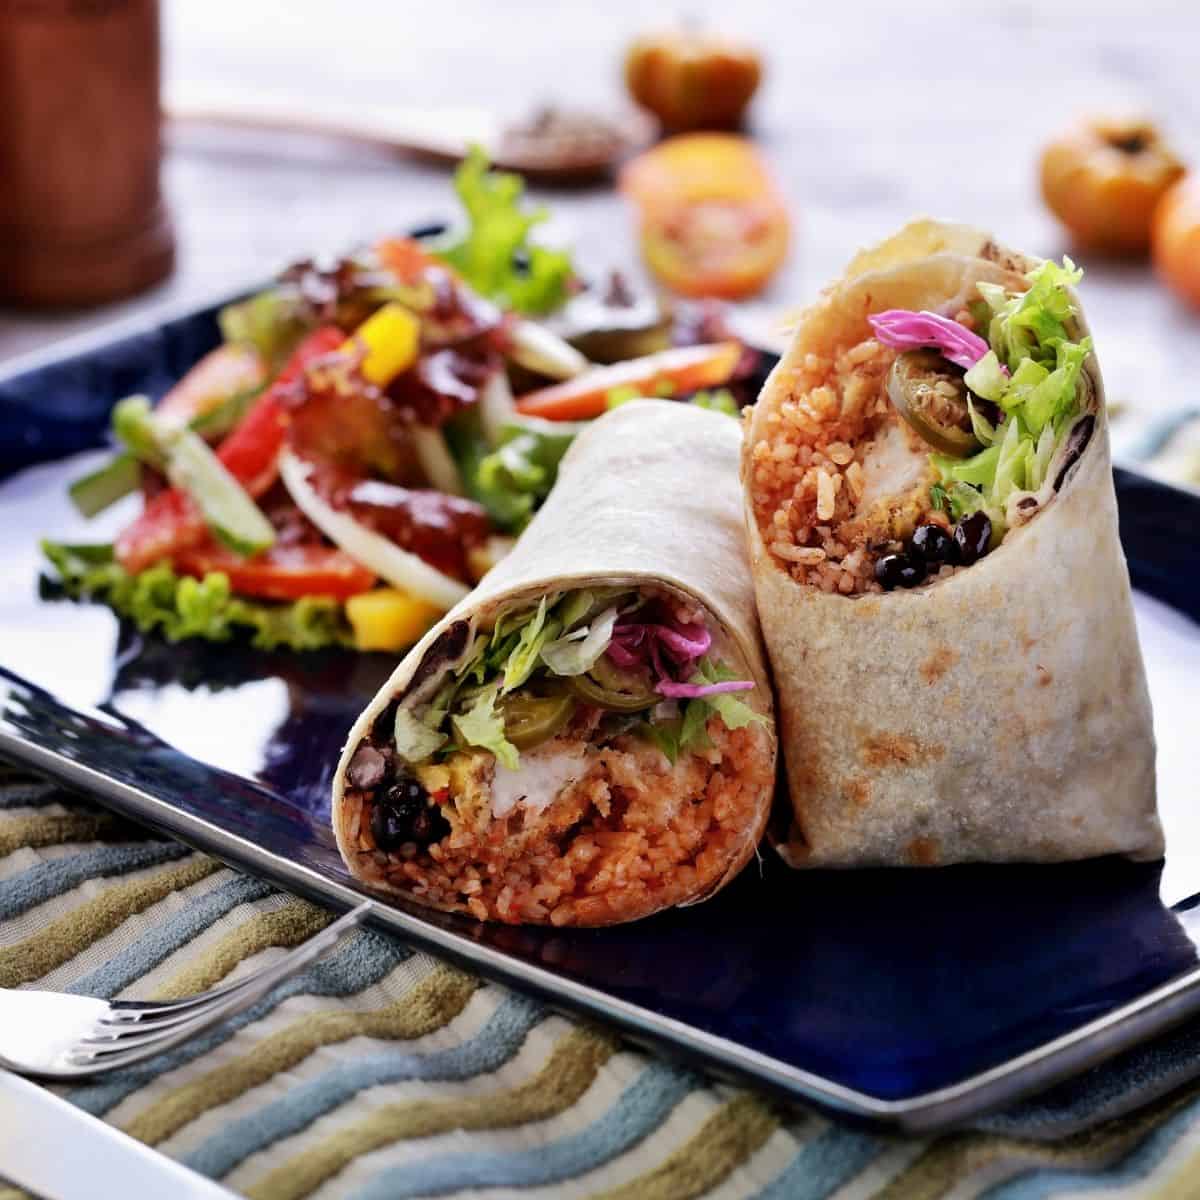 What To Serve With Burritos: 15 Ideas To Get You Started